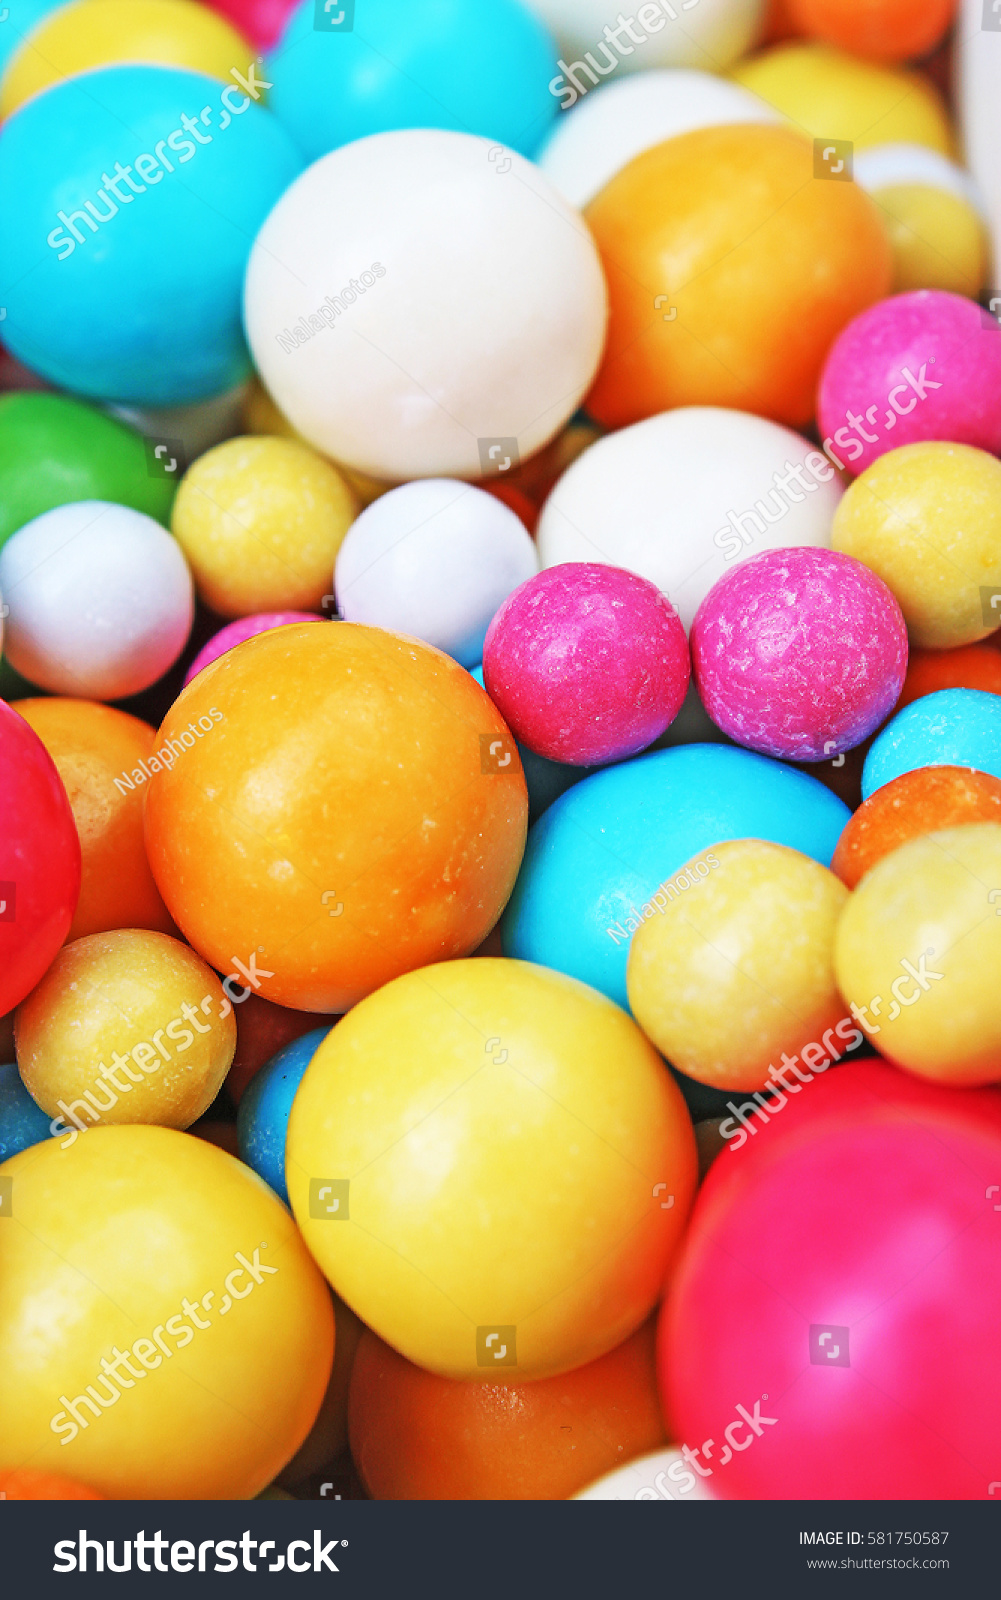 Bubble gum chewing gum texture. Rainbow multicolored gumballs chewing gums as background. Round sugar coated candy bonbon bubblegum texture. Colorful multicolor bubblegums wallpaper. Candy background #581750587